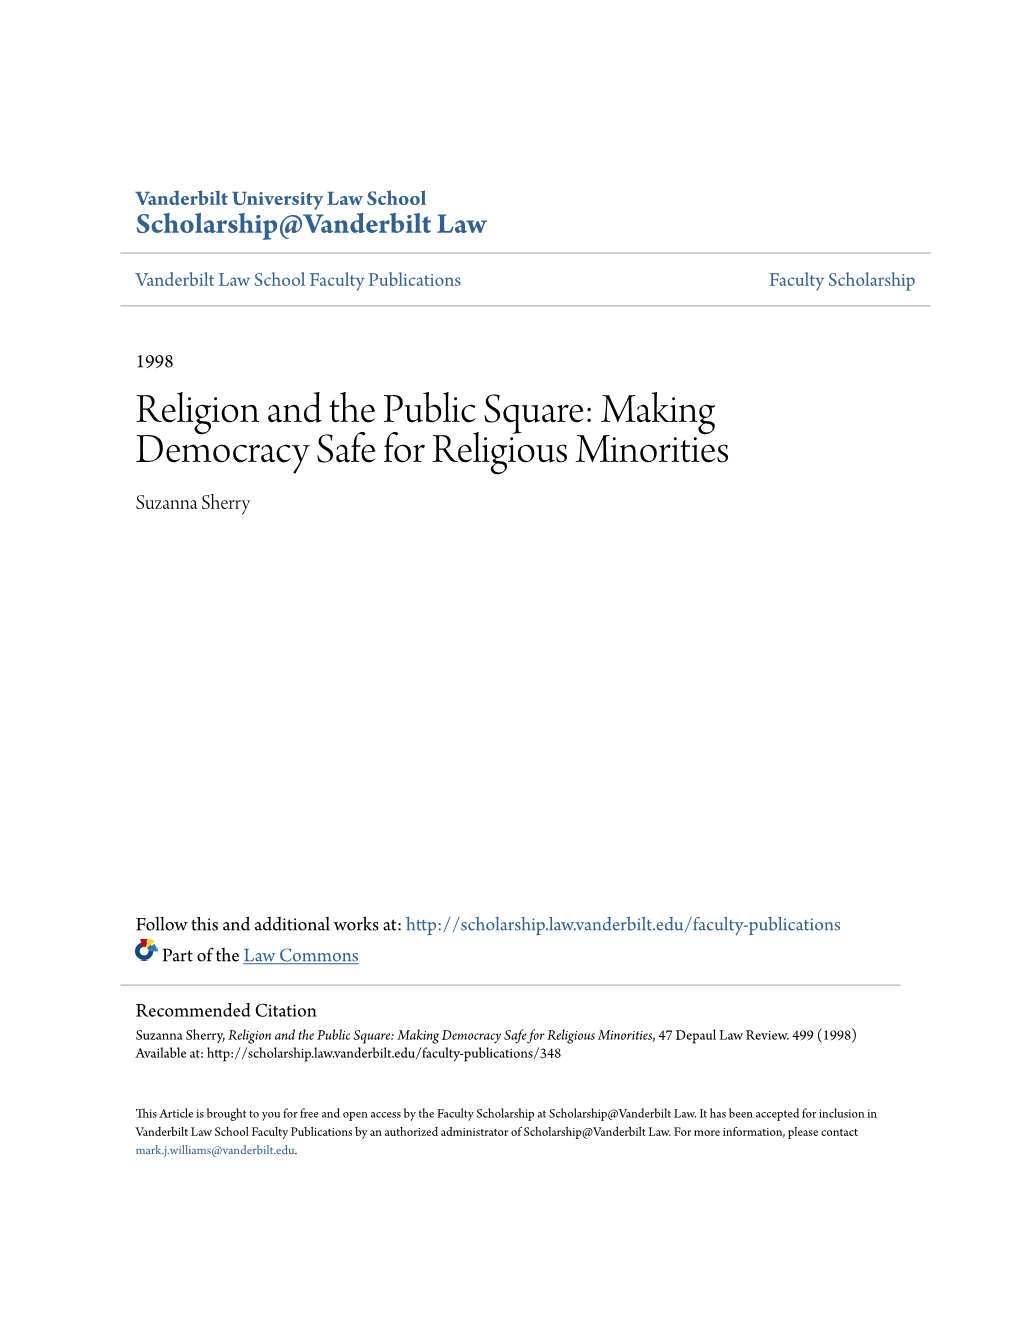 Religion and the Public Square: Making Democracy Safe for Religious Minorities Suzanna Sherry